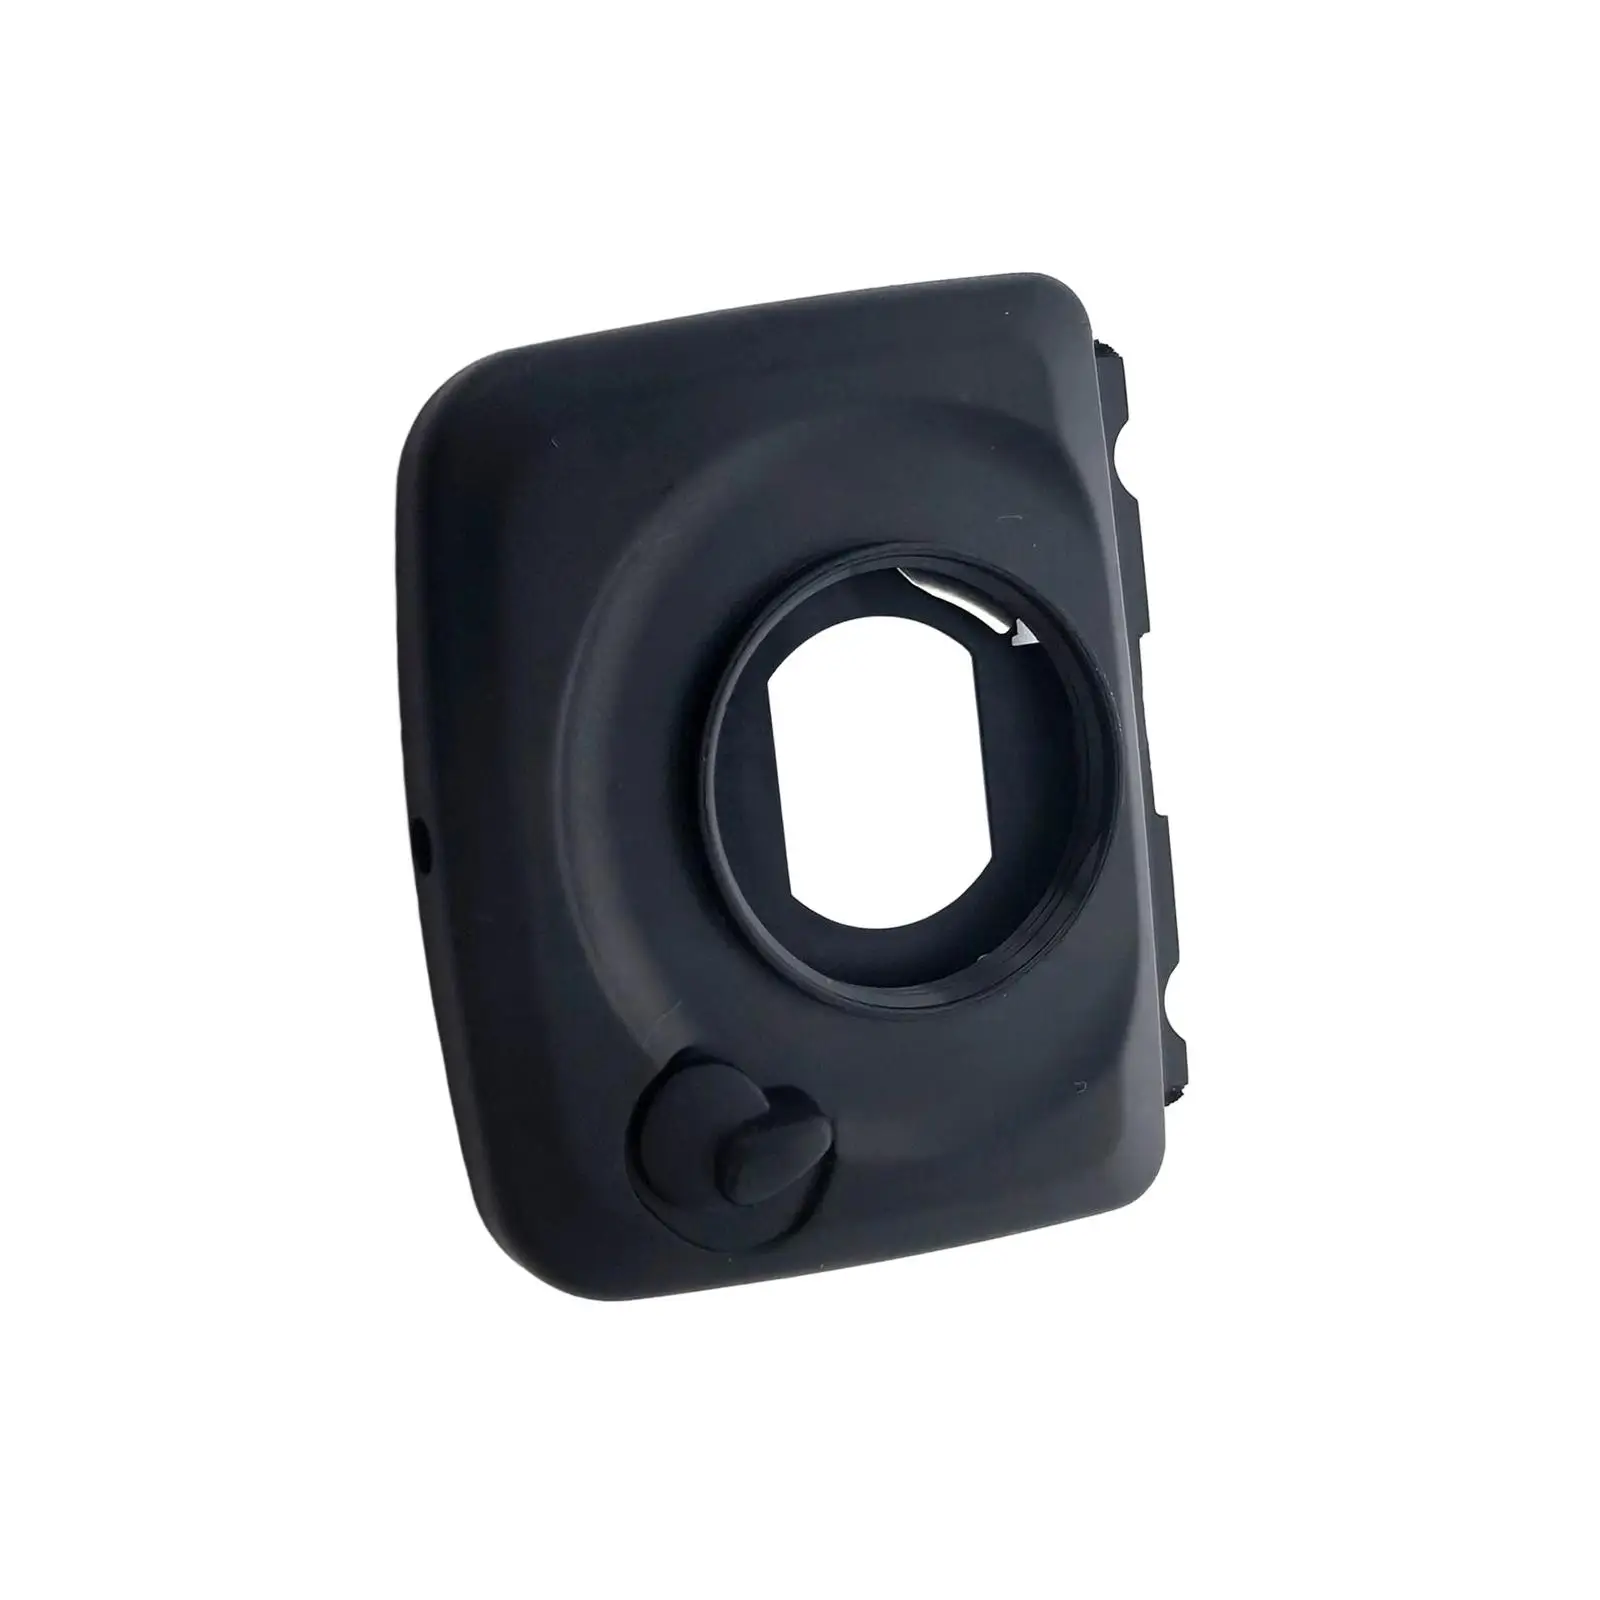 Camera Viewfinder Eyecup Black High Strength Eyepice for D810 Digital Camera Replacement